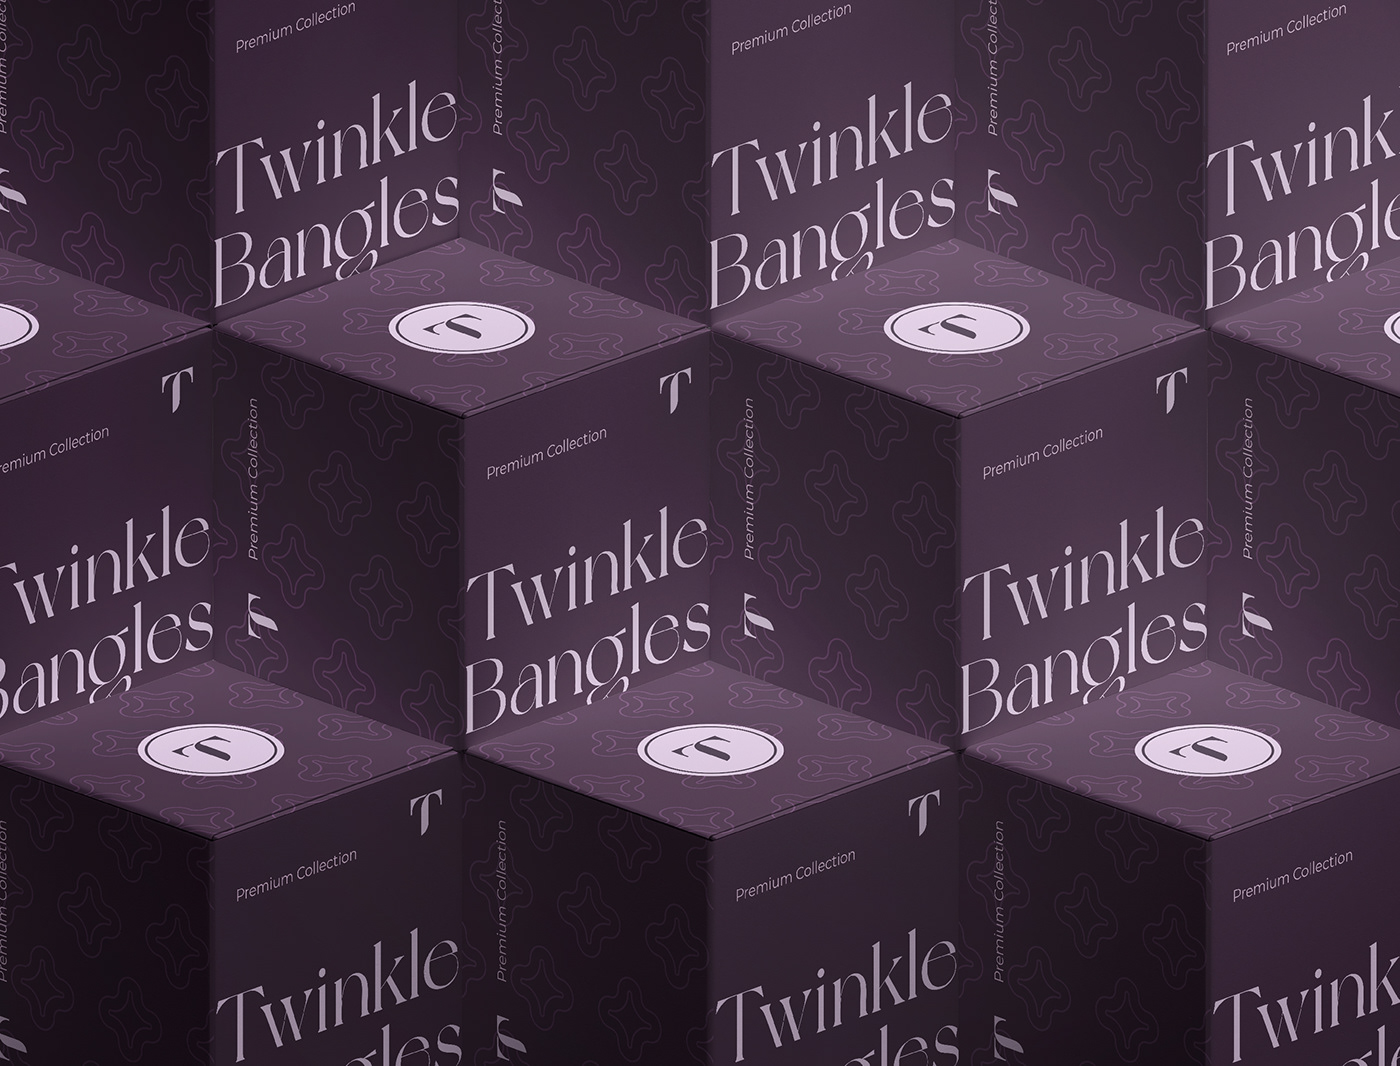 Packaging design for twinkle bangles